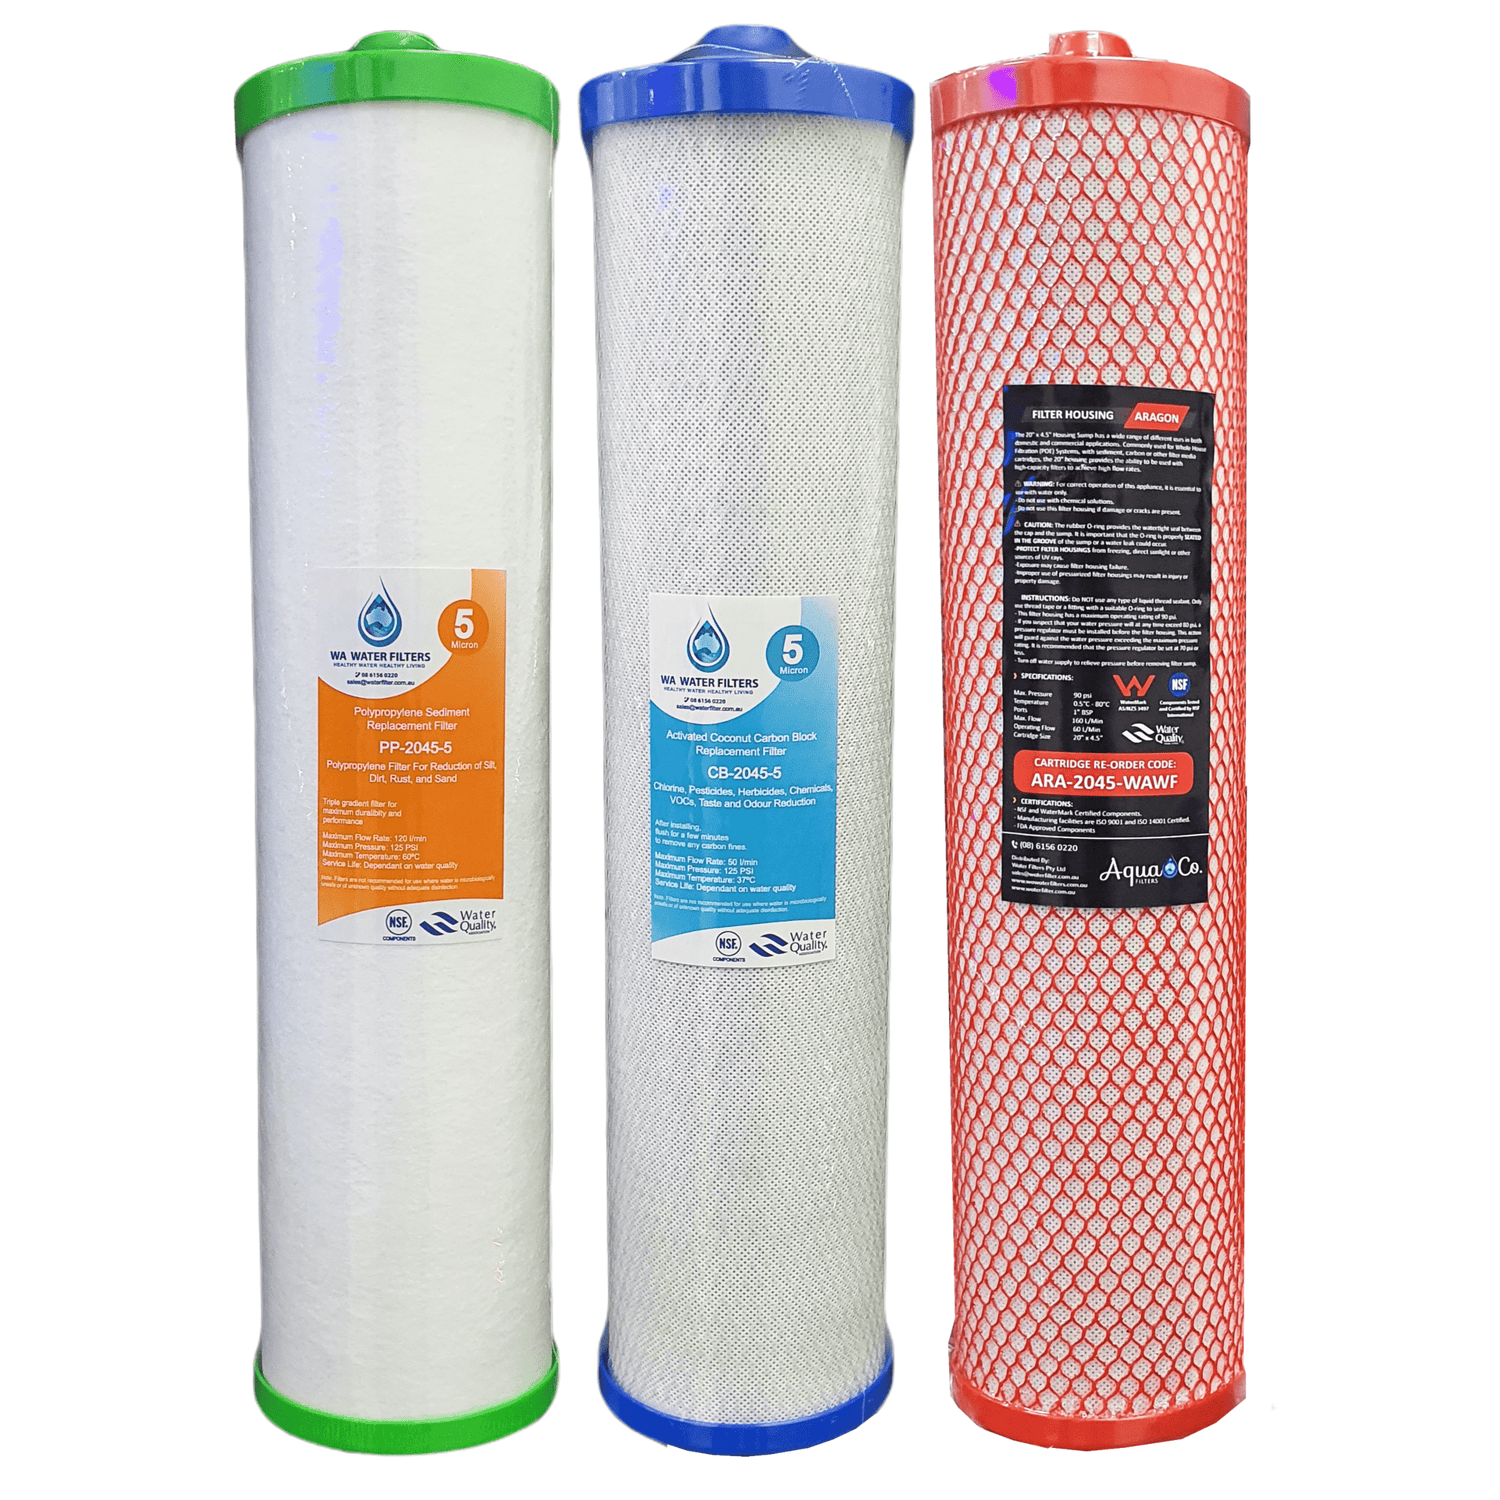 Replacement Filters for Whole House Systems